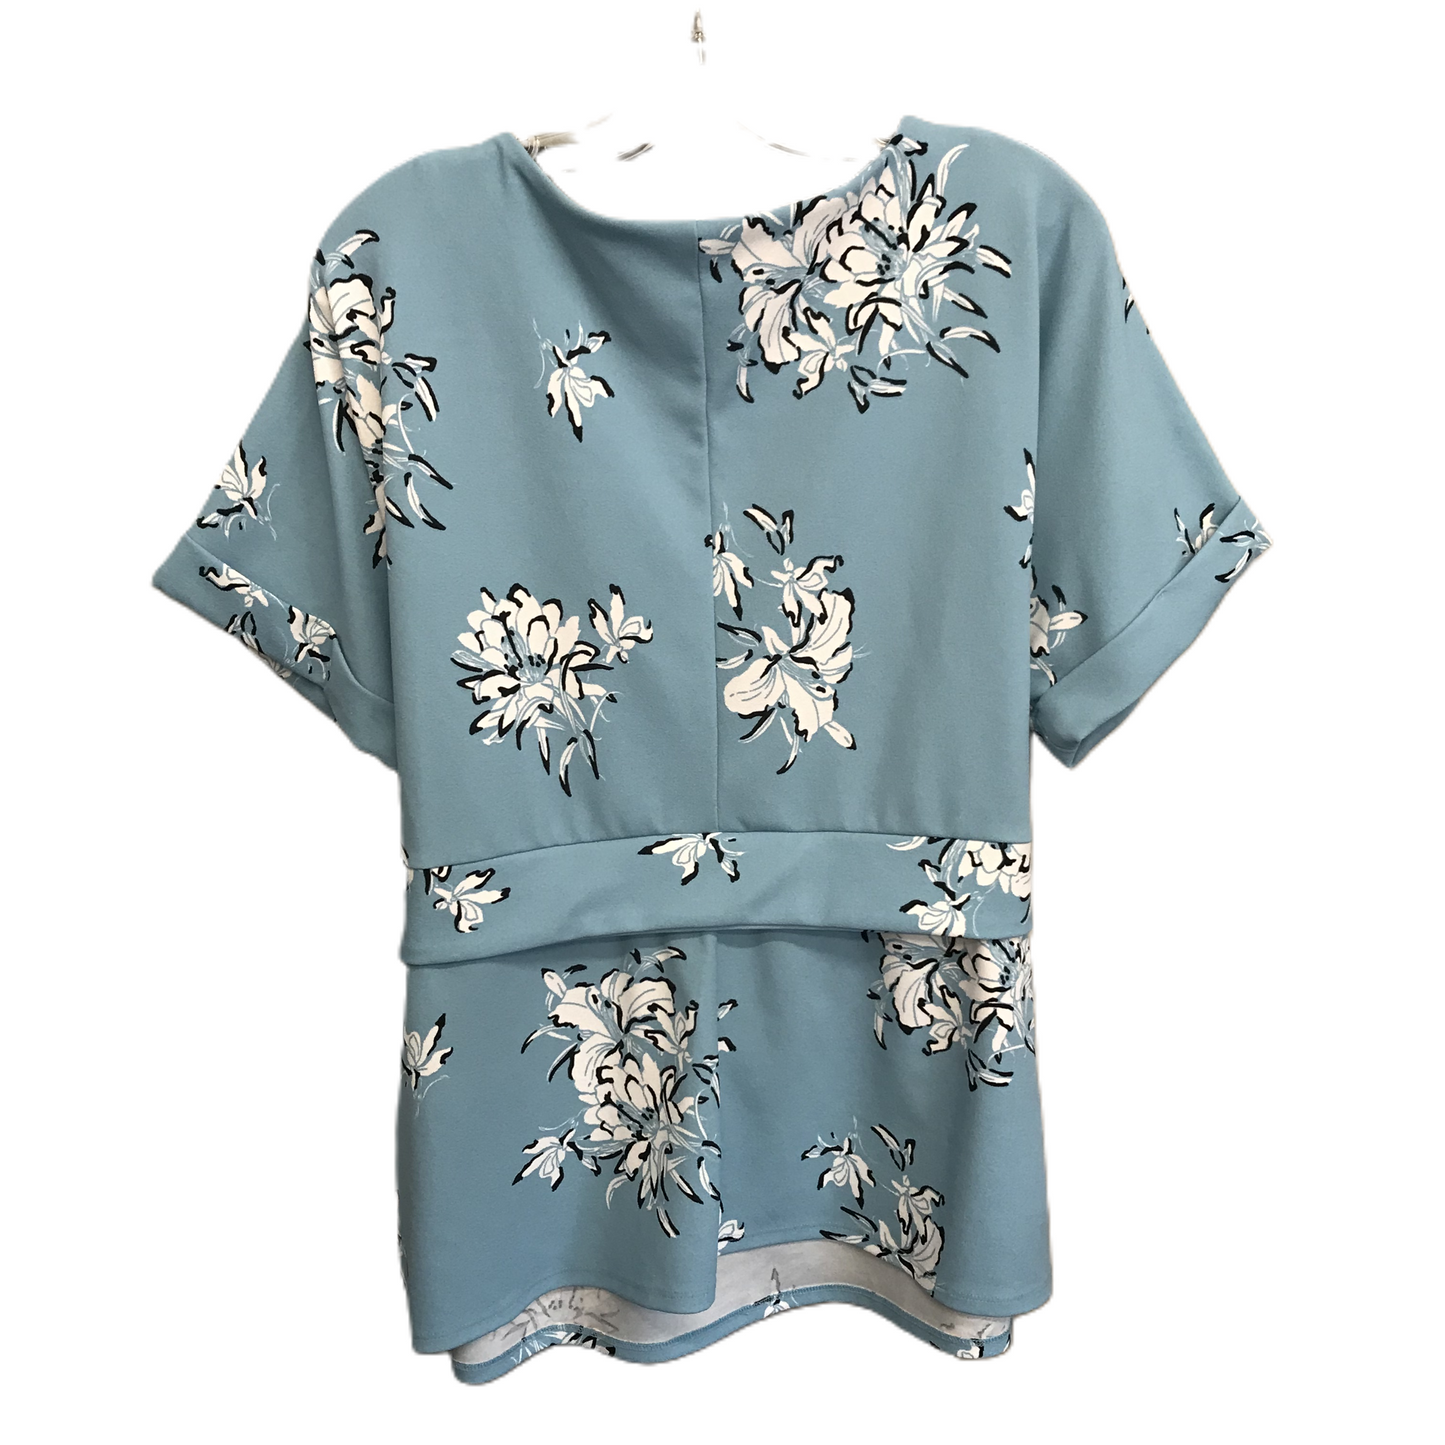 Floral Print Top Short Sleeve By Worthington, Size: Xl